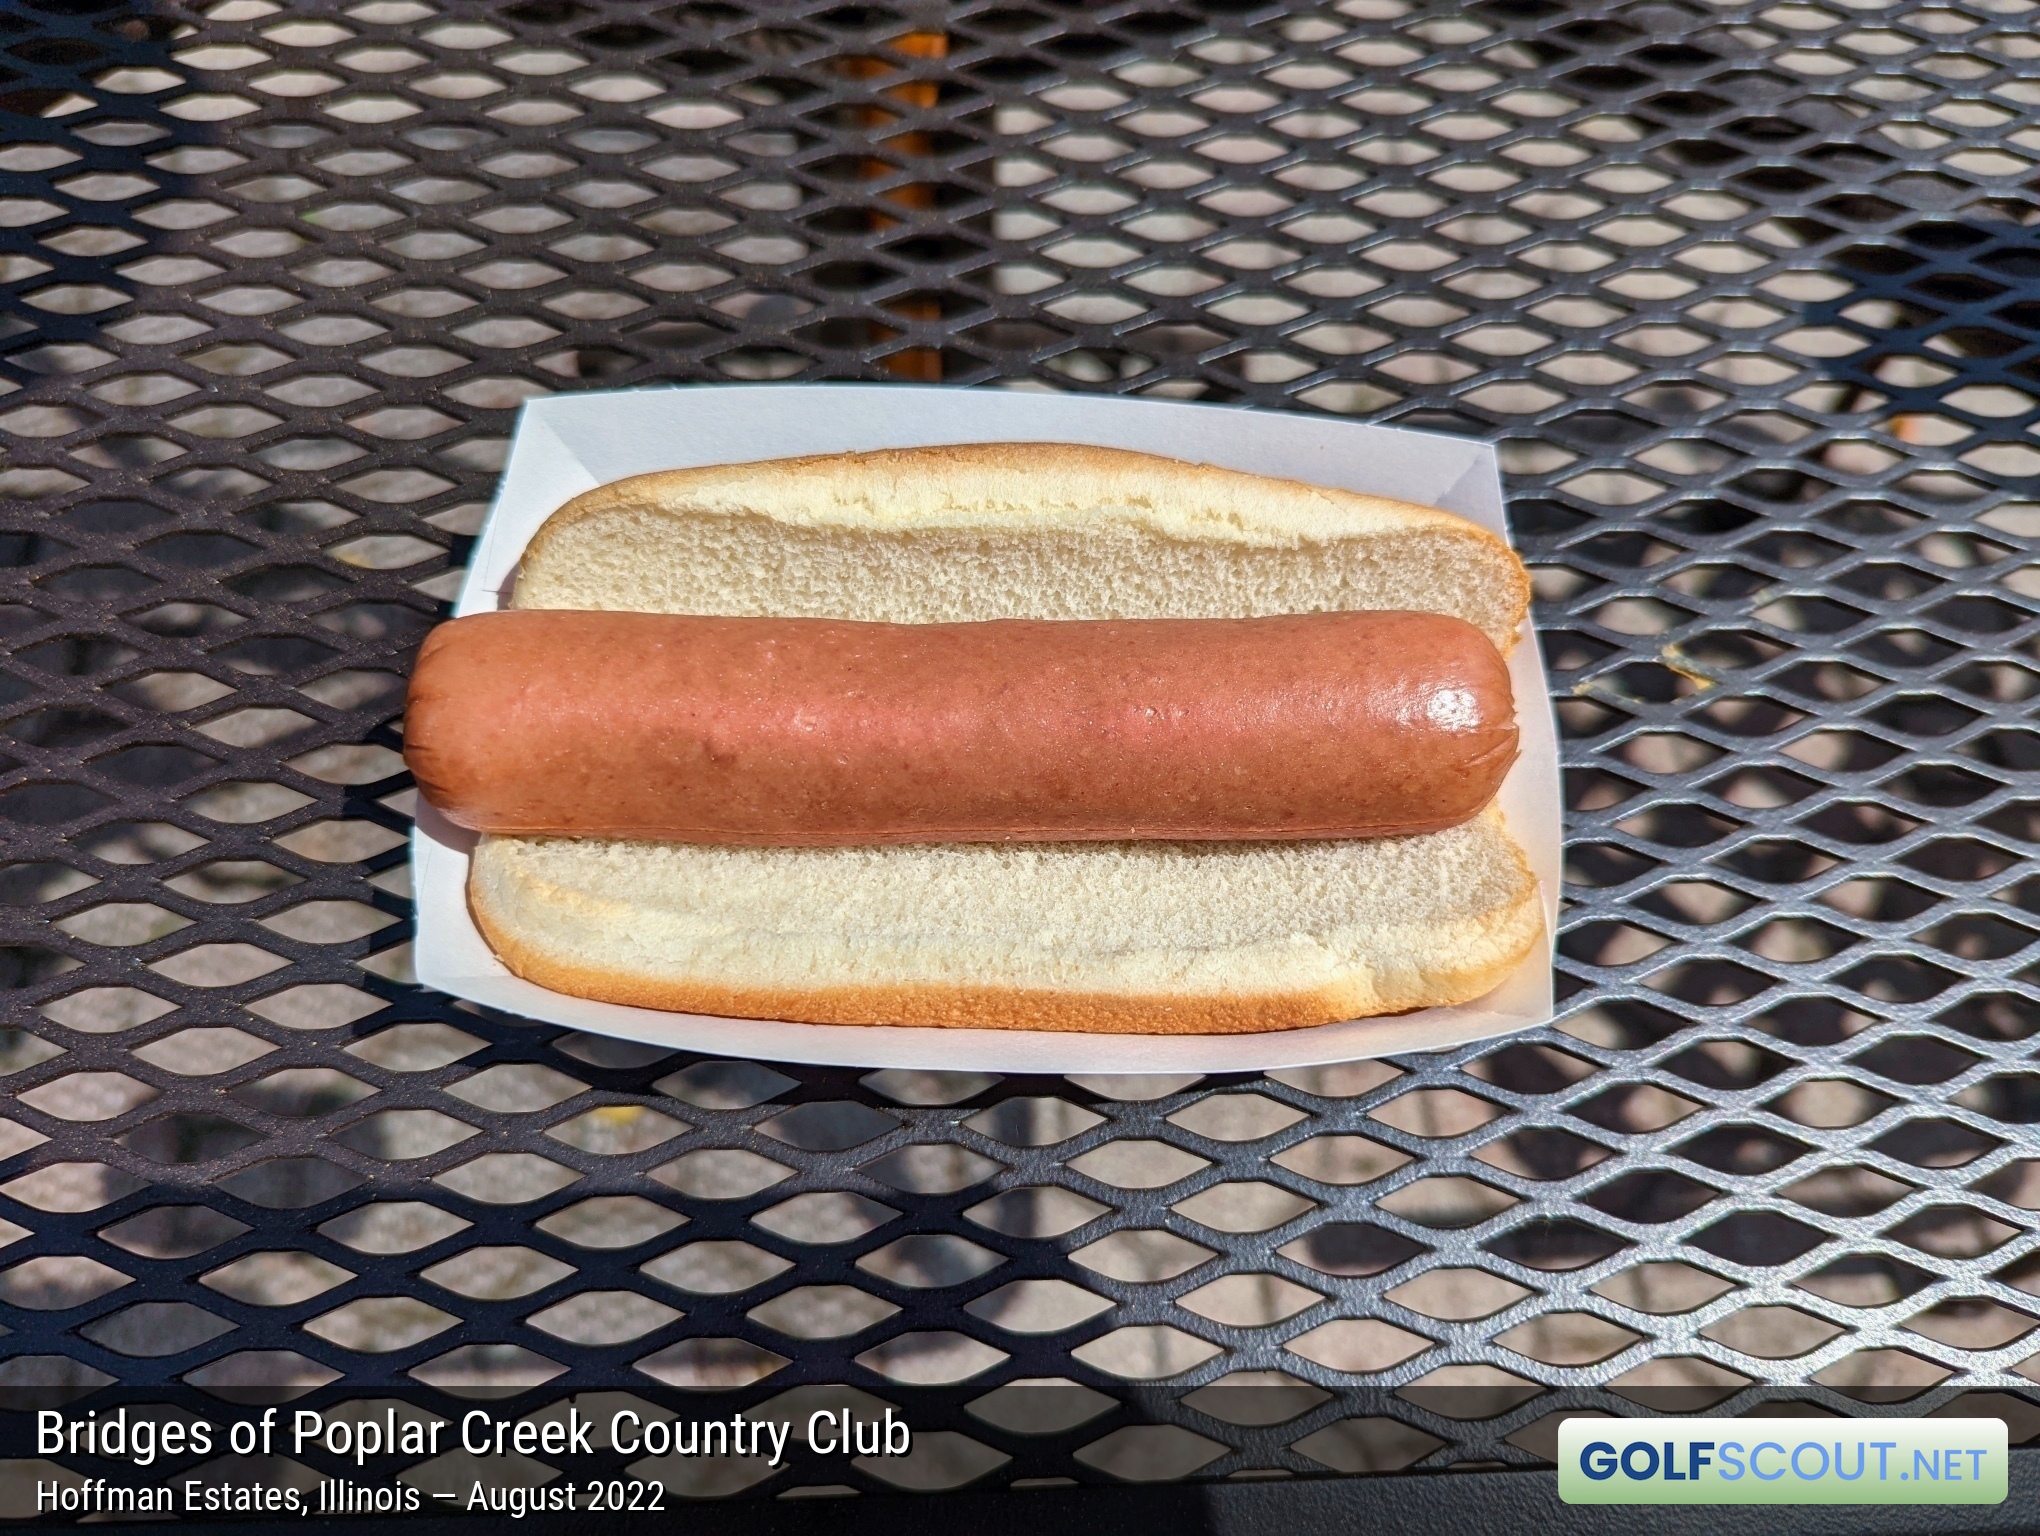 Photo of the food and dining at Bridges of Poplar Creek Country Club in Hoffman Estates, Illinois. Photo of the hot dog at Bridges of Poplar Creek Country Club in Hoffman Estates, Illinois.